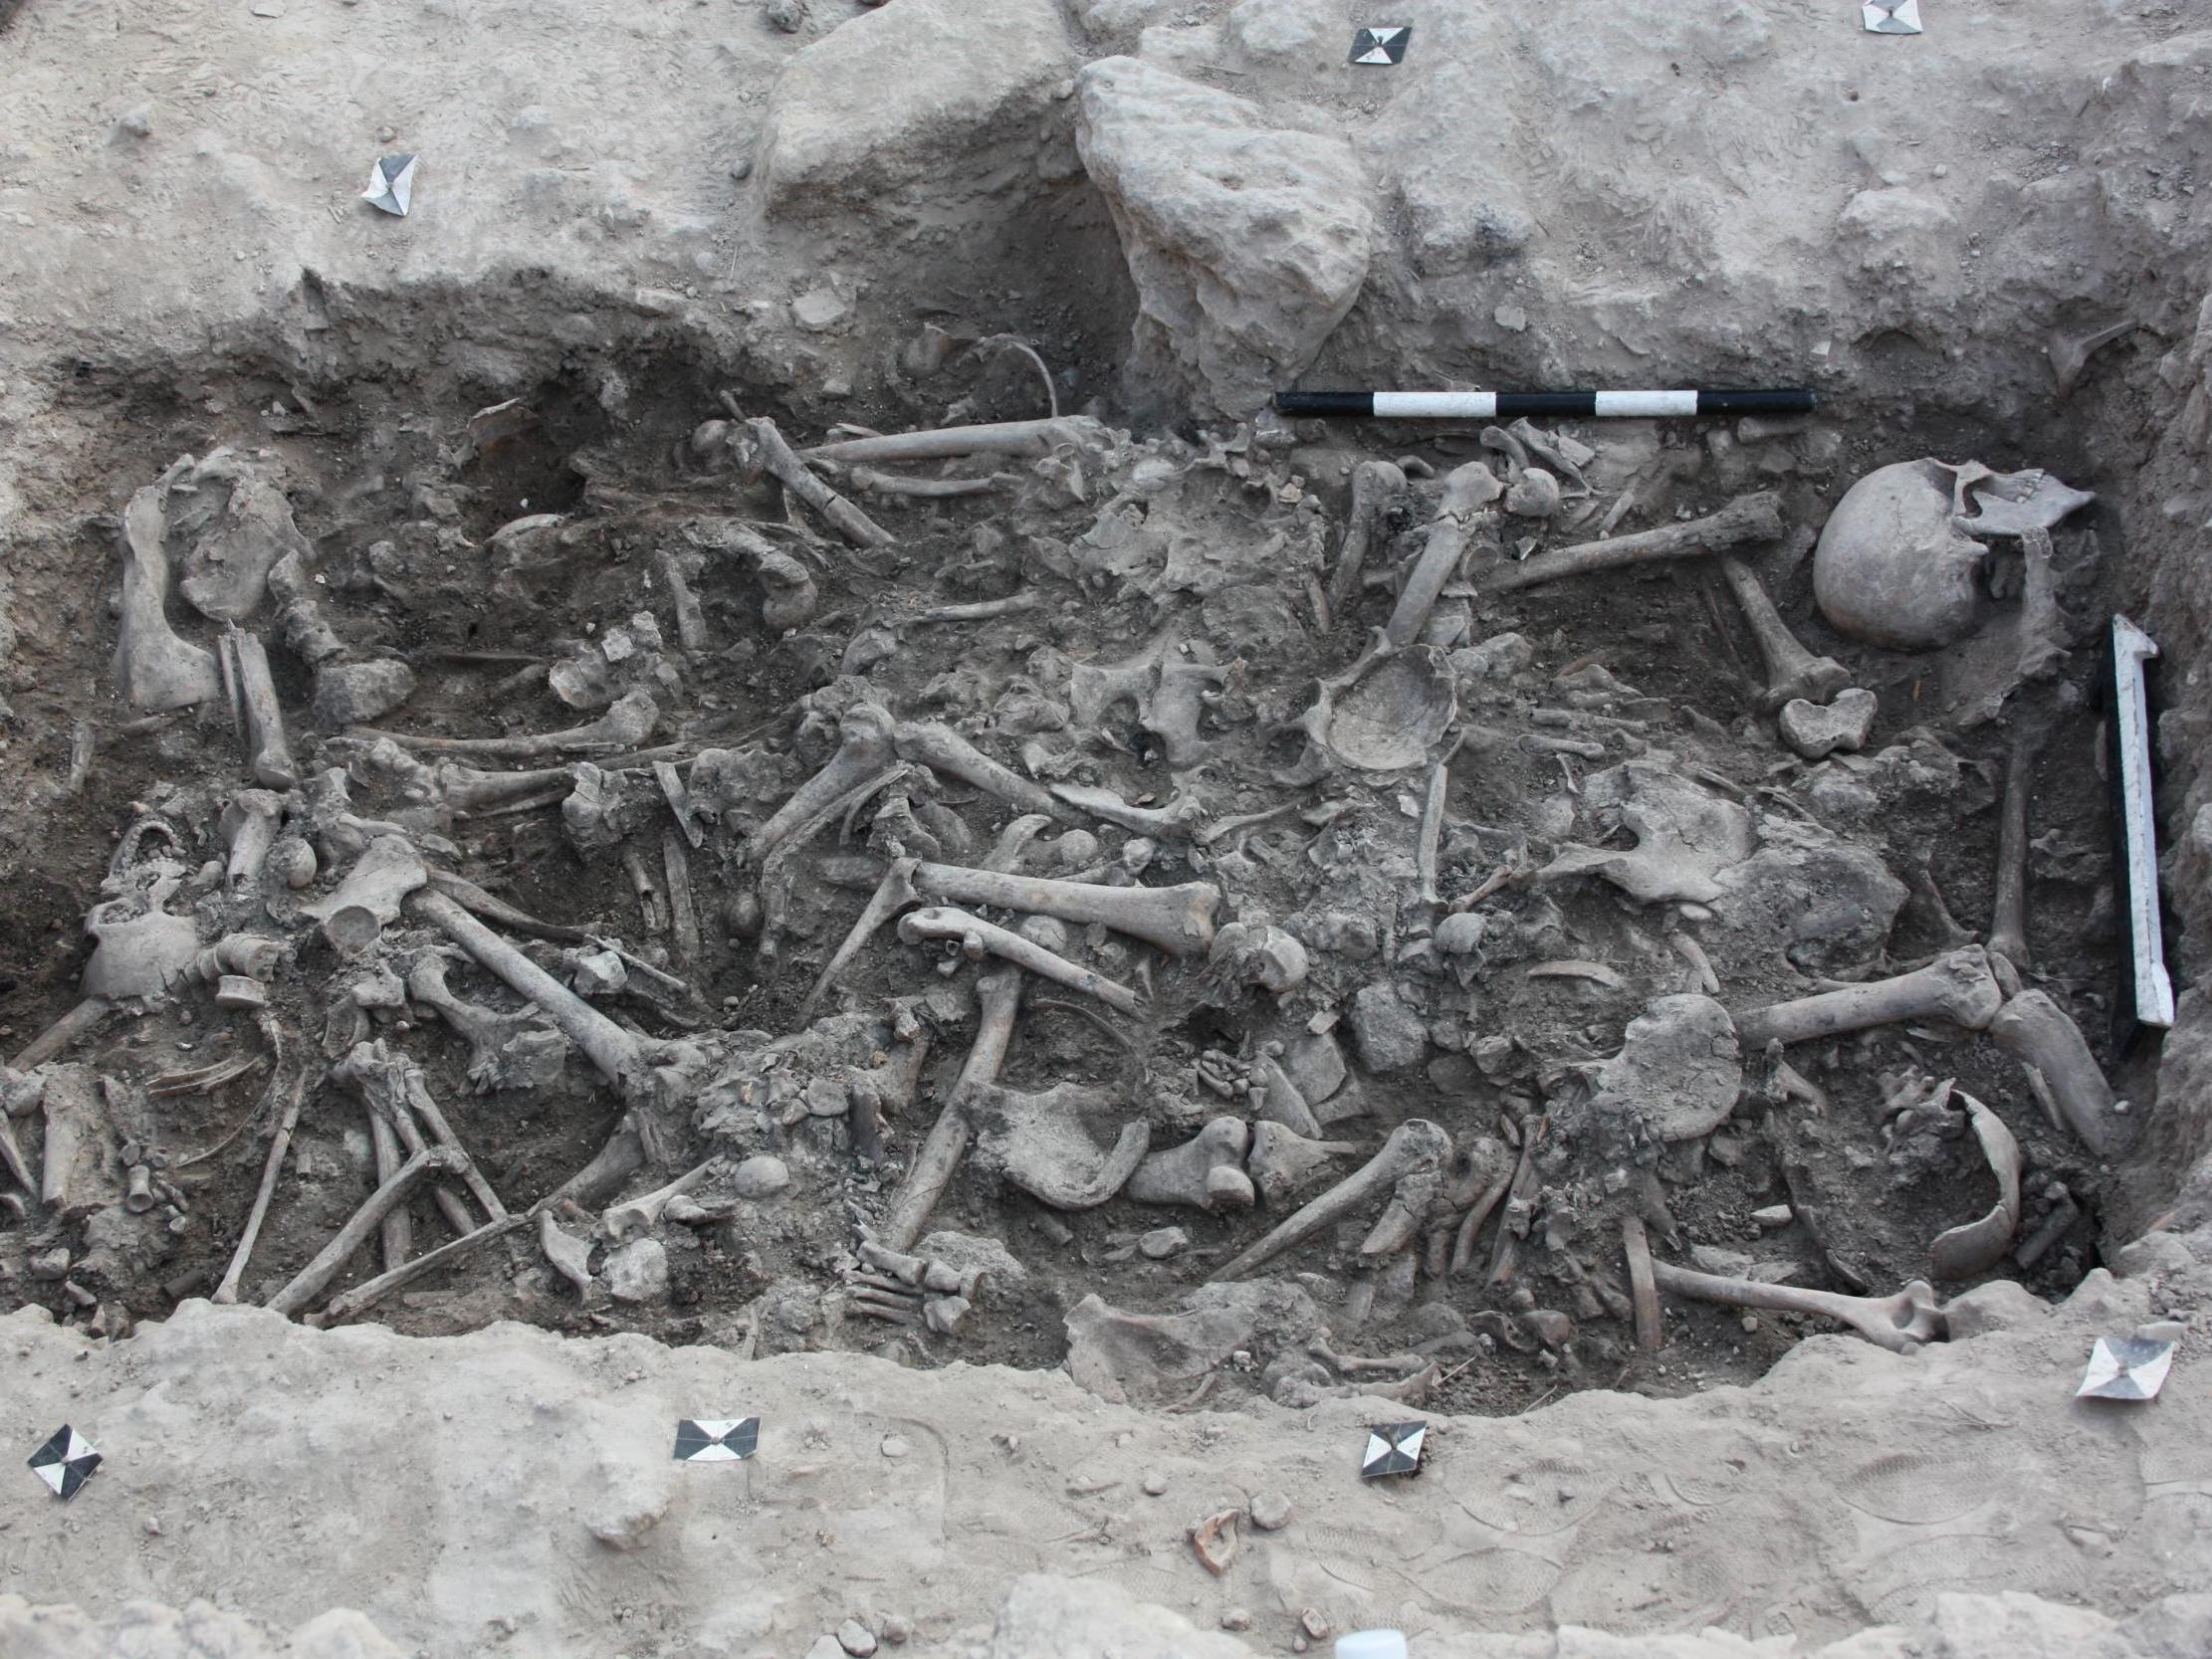 The bones of Crusaders found in a burial pit in Sidon, Lebanon